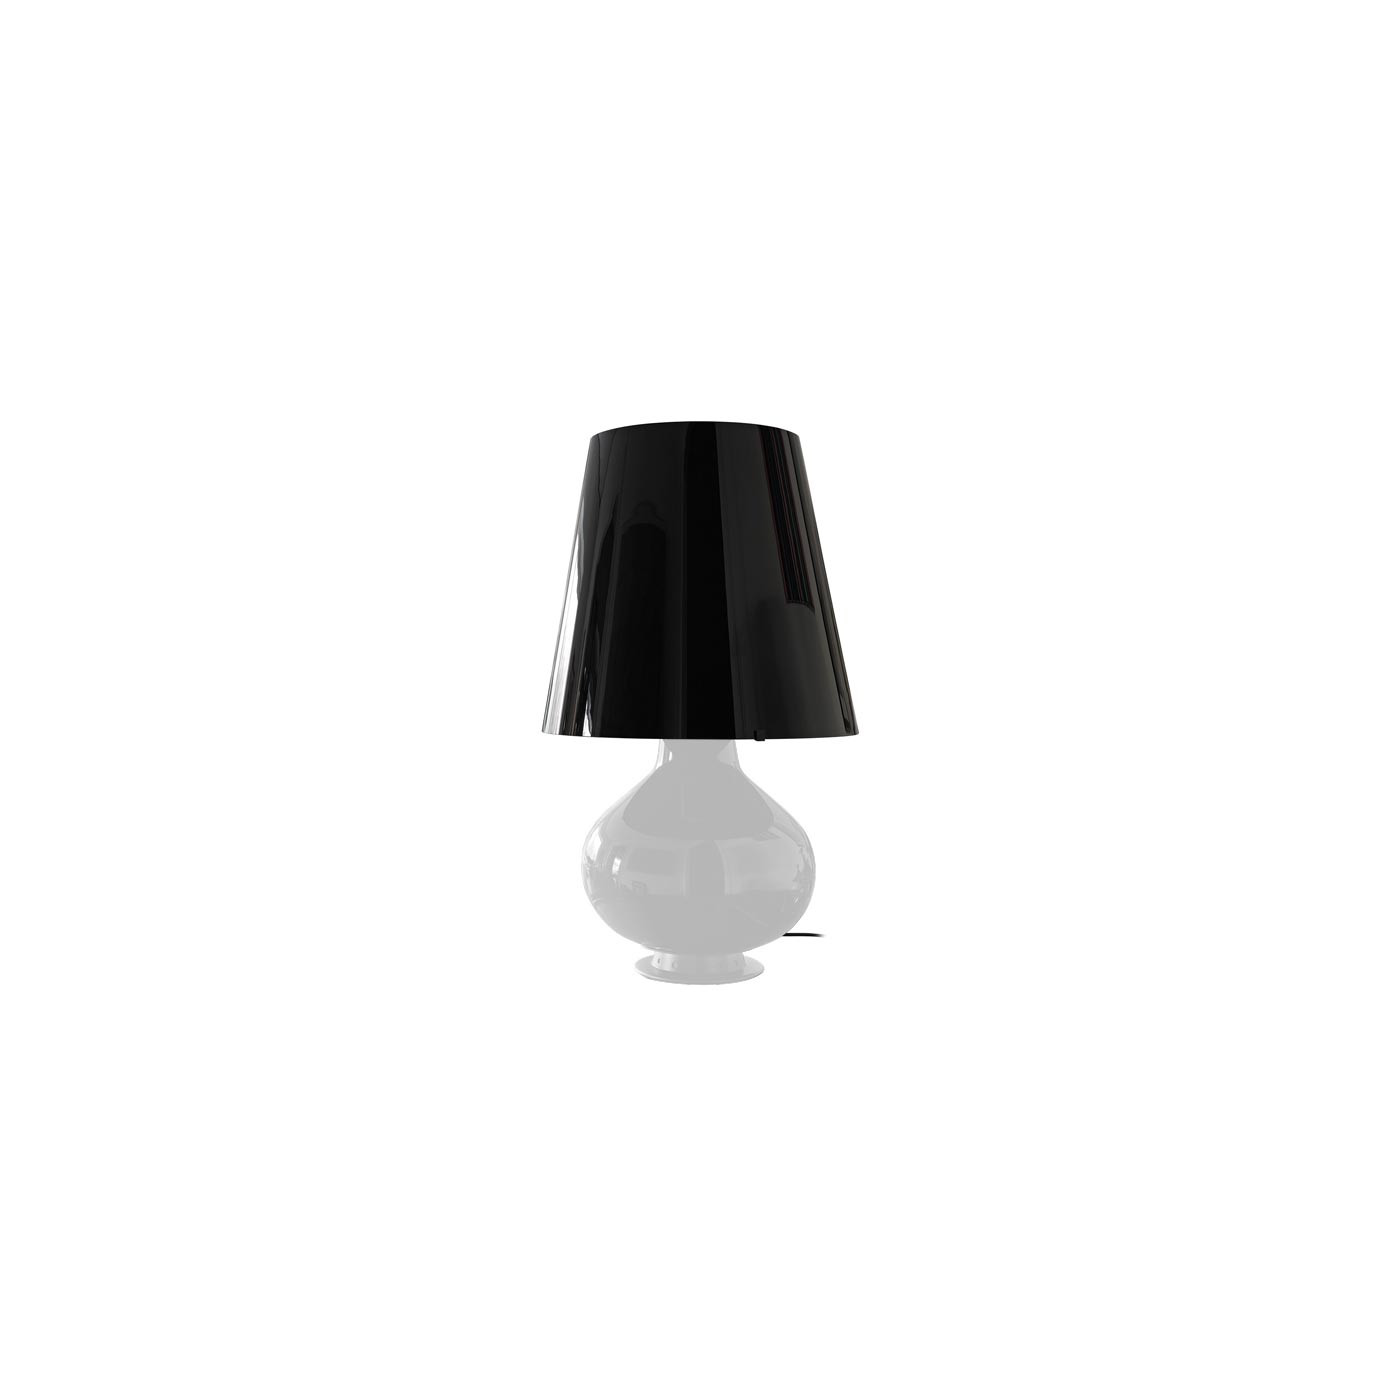 Fontanaarte Replacement Shade For Total Black Table Lamp